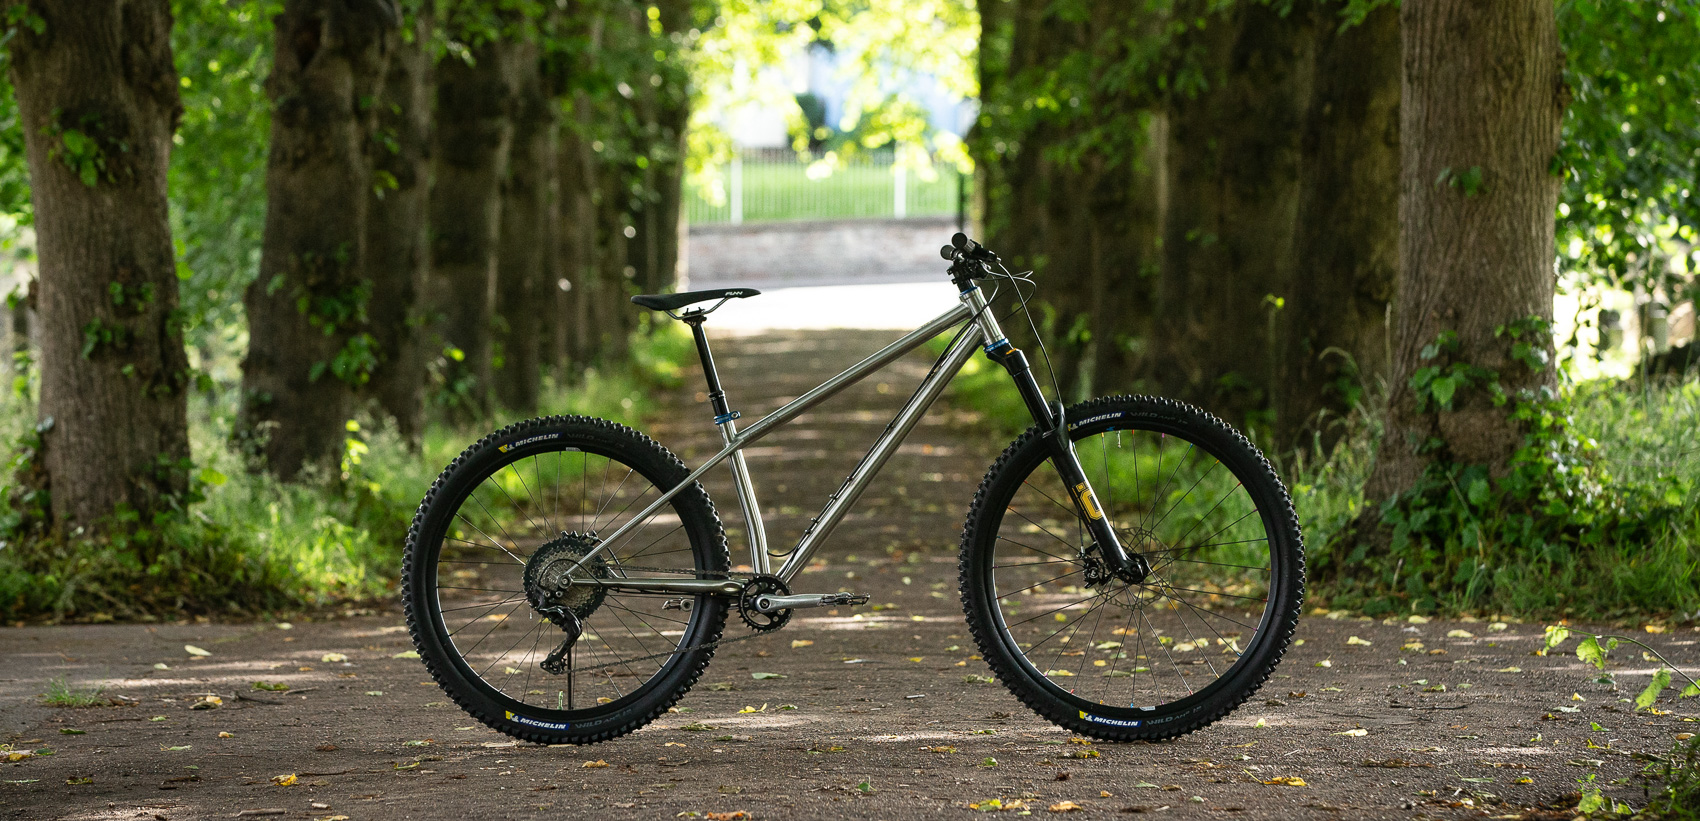 www.starlingcycles.com